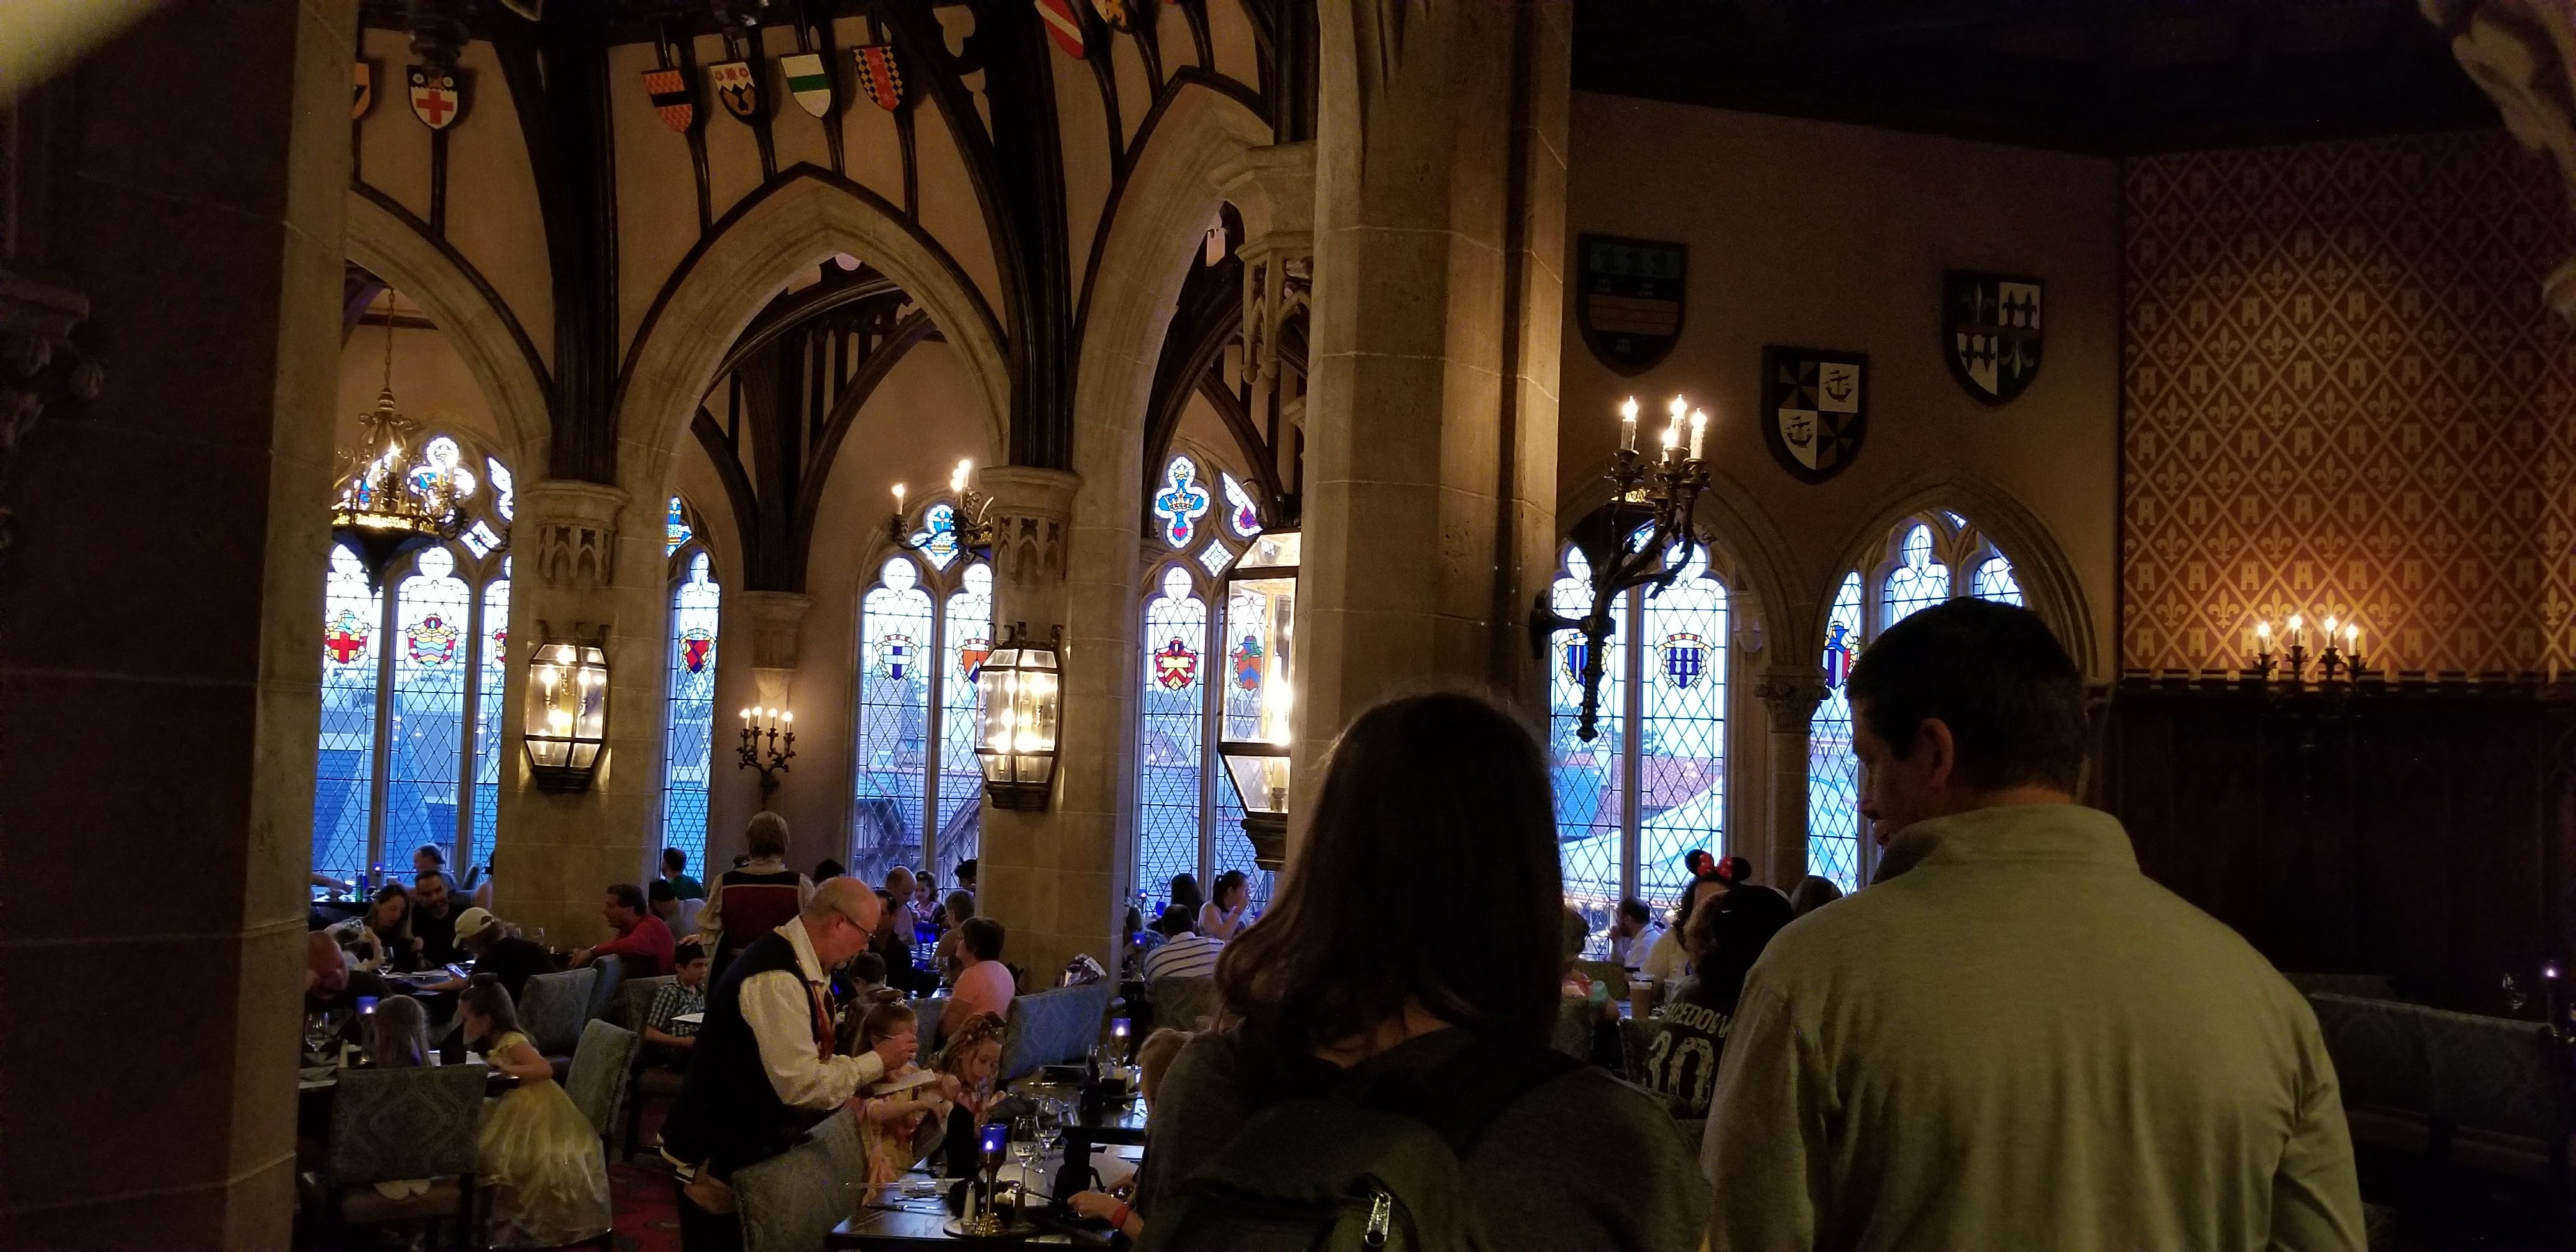 Changes To Character Dining At Disney World Dining 4